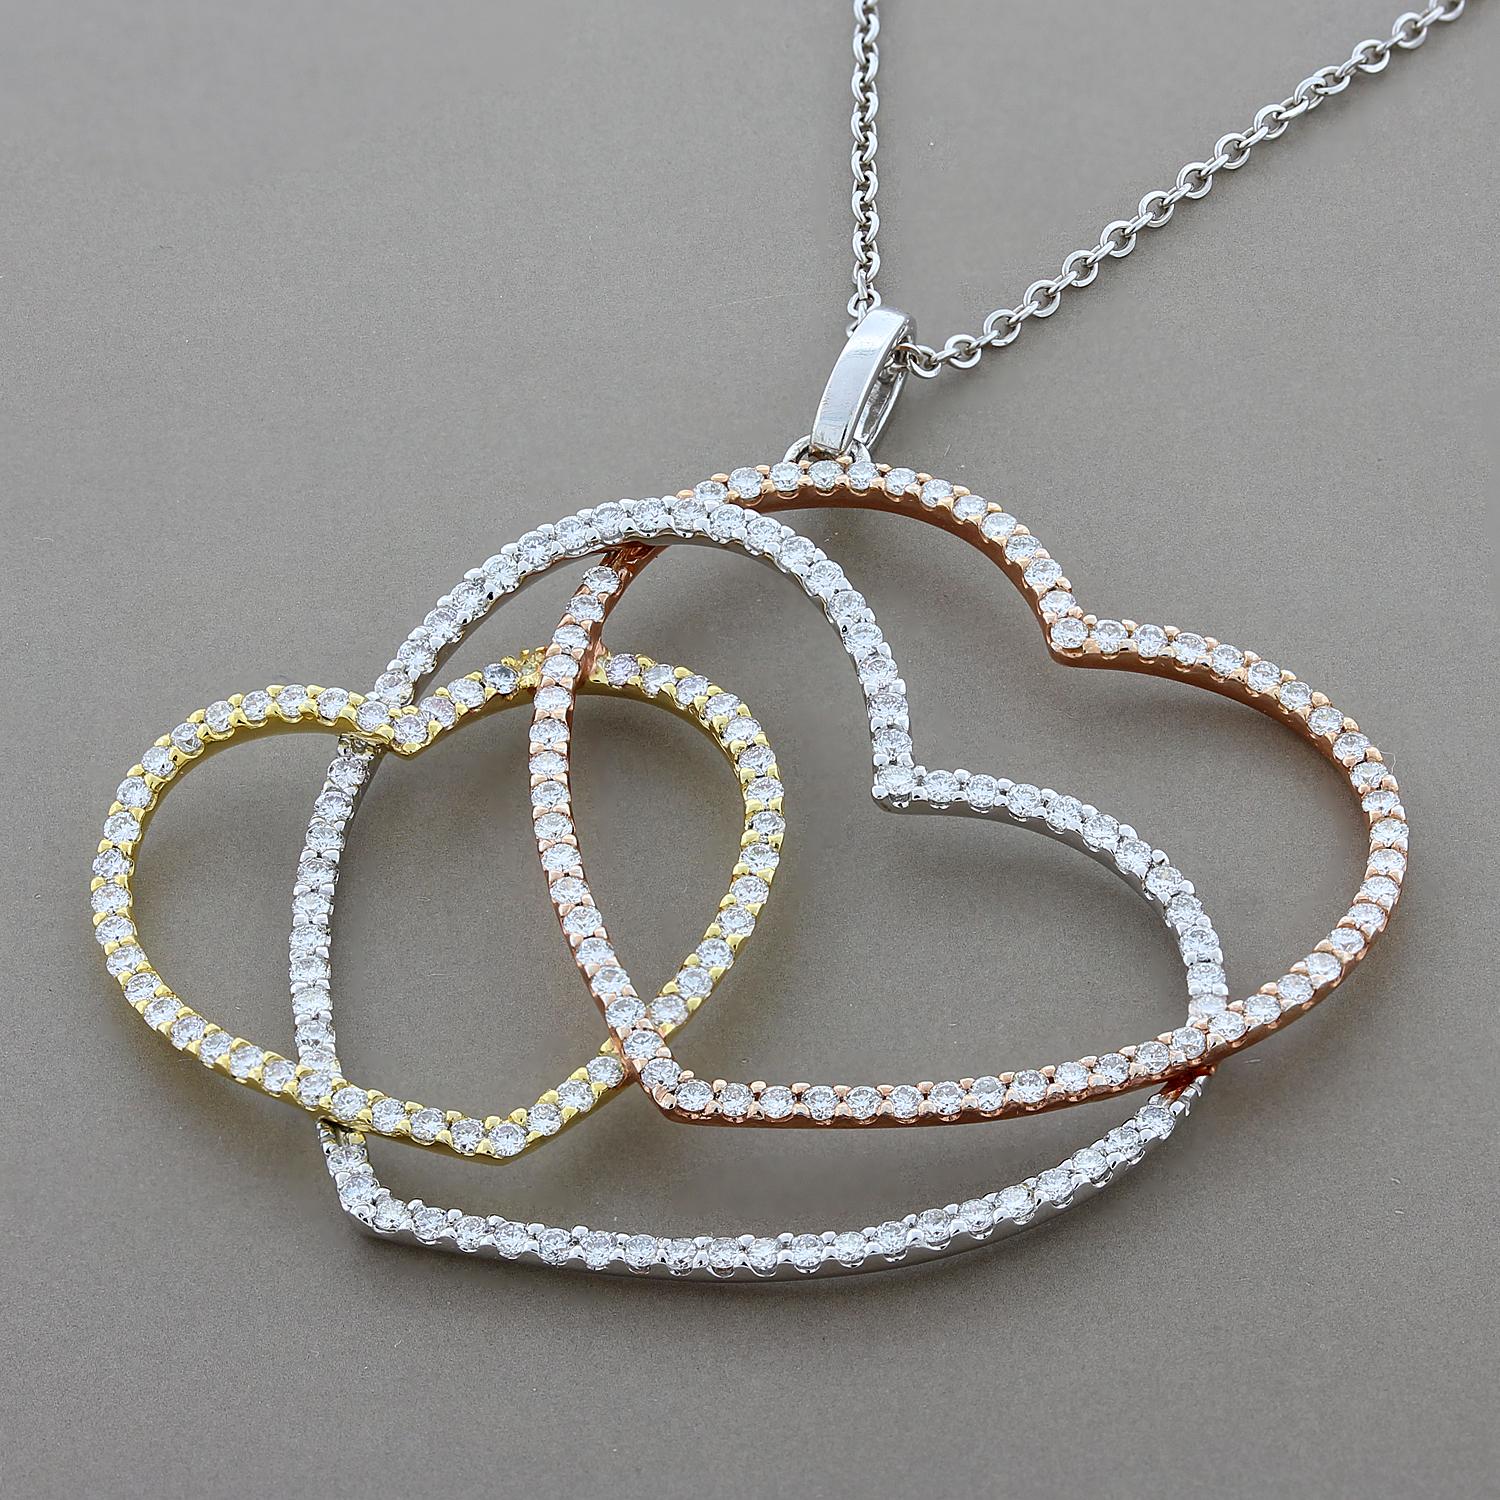 Love is in the air! This pendant of three intertwined tri-tone hearts features 2.07 carats of VS quality white diamonds. The rose gold, white gold and yellow gold heart halos are made of 18K gold. 

Chain Length: 18 inches
Pendant Length: 1 ¾